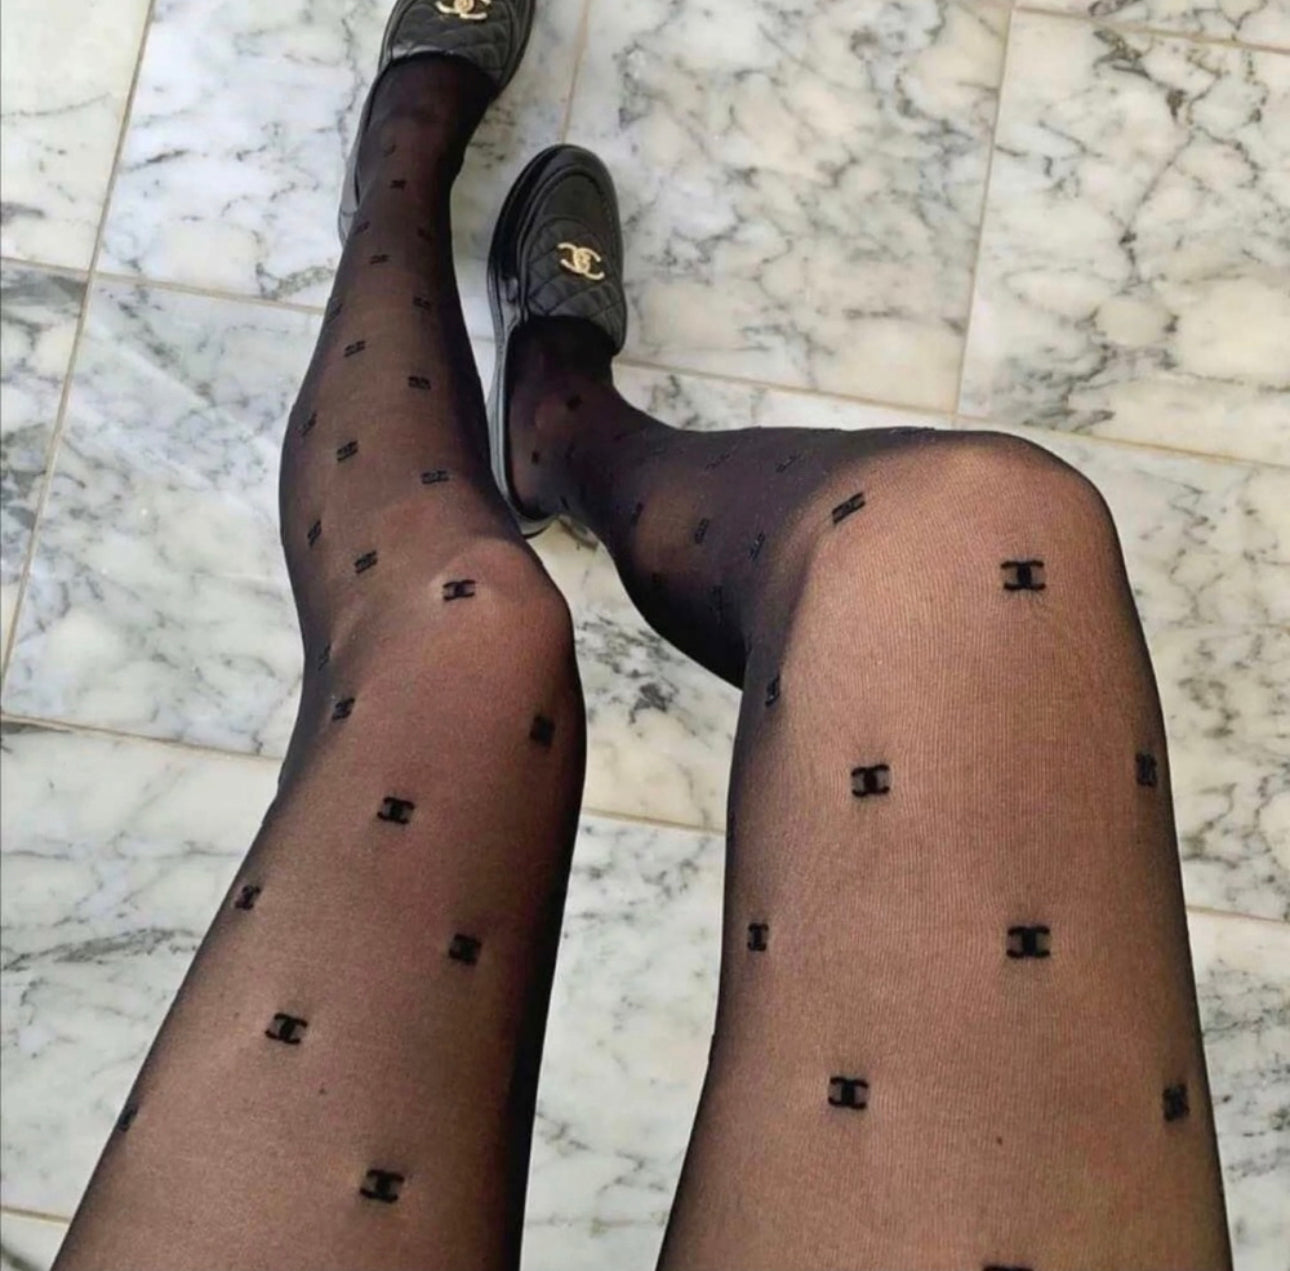 Balenciaga Chanel Tights for Sale in The Bronx, NY - OfferUp